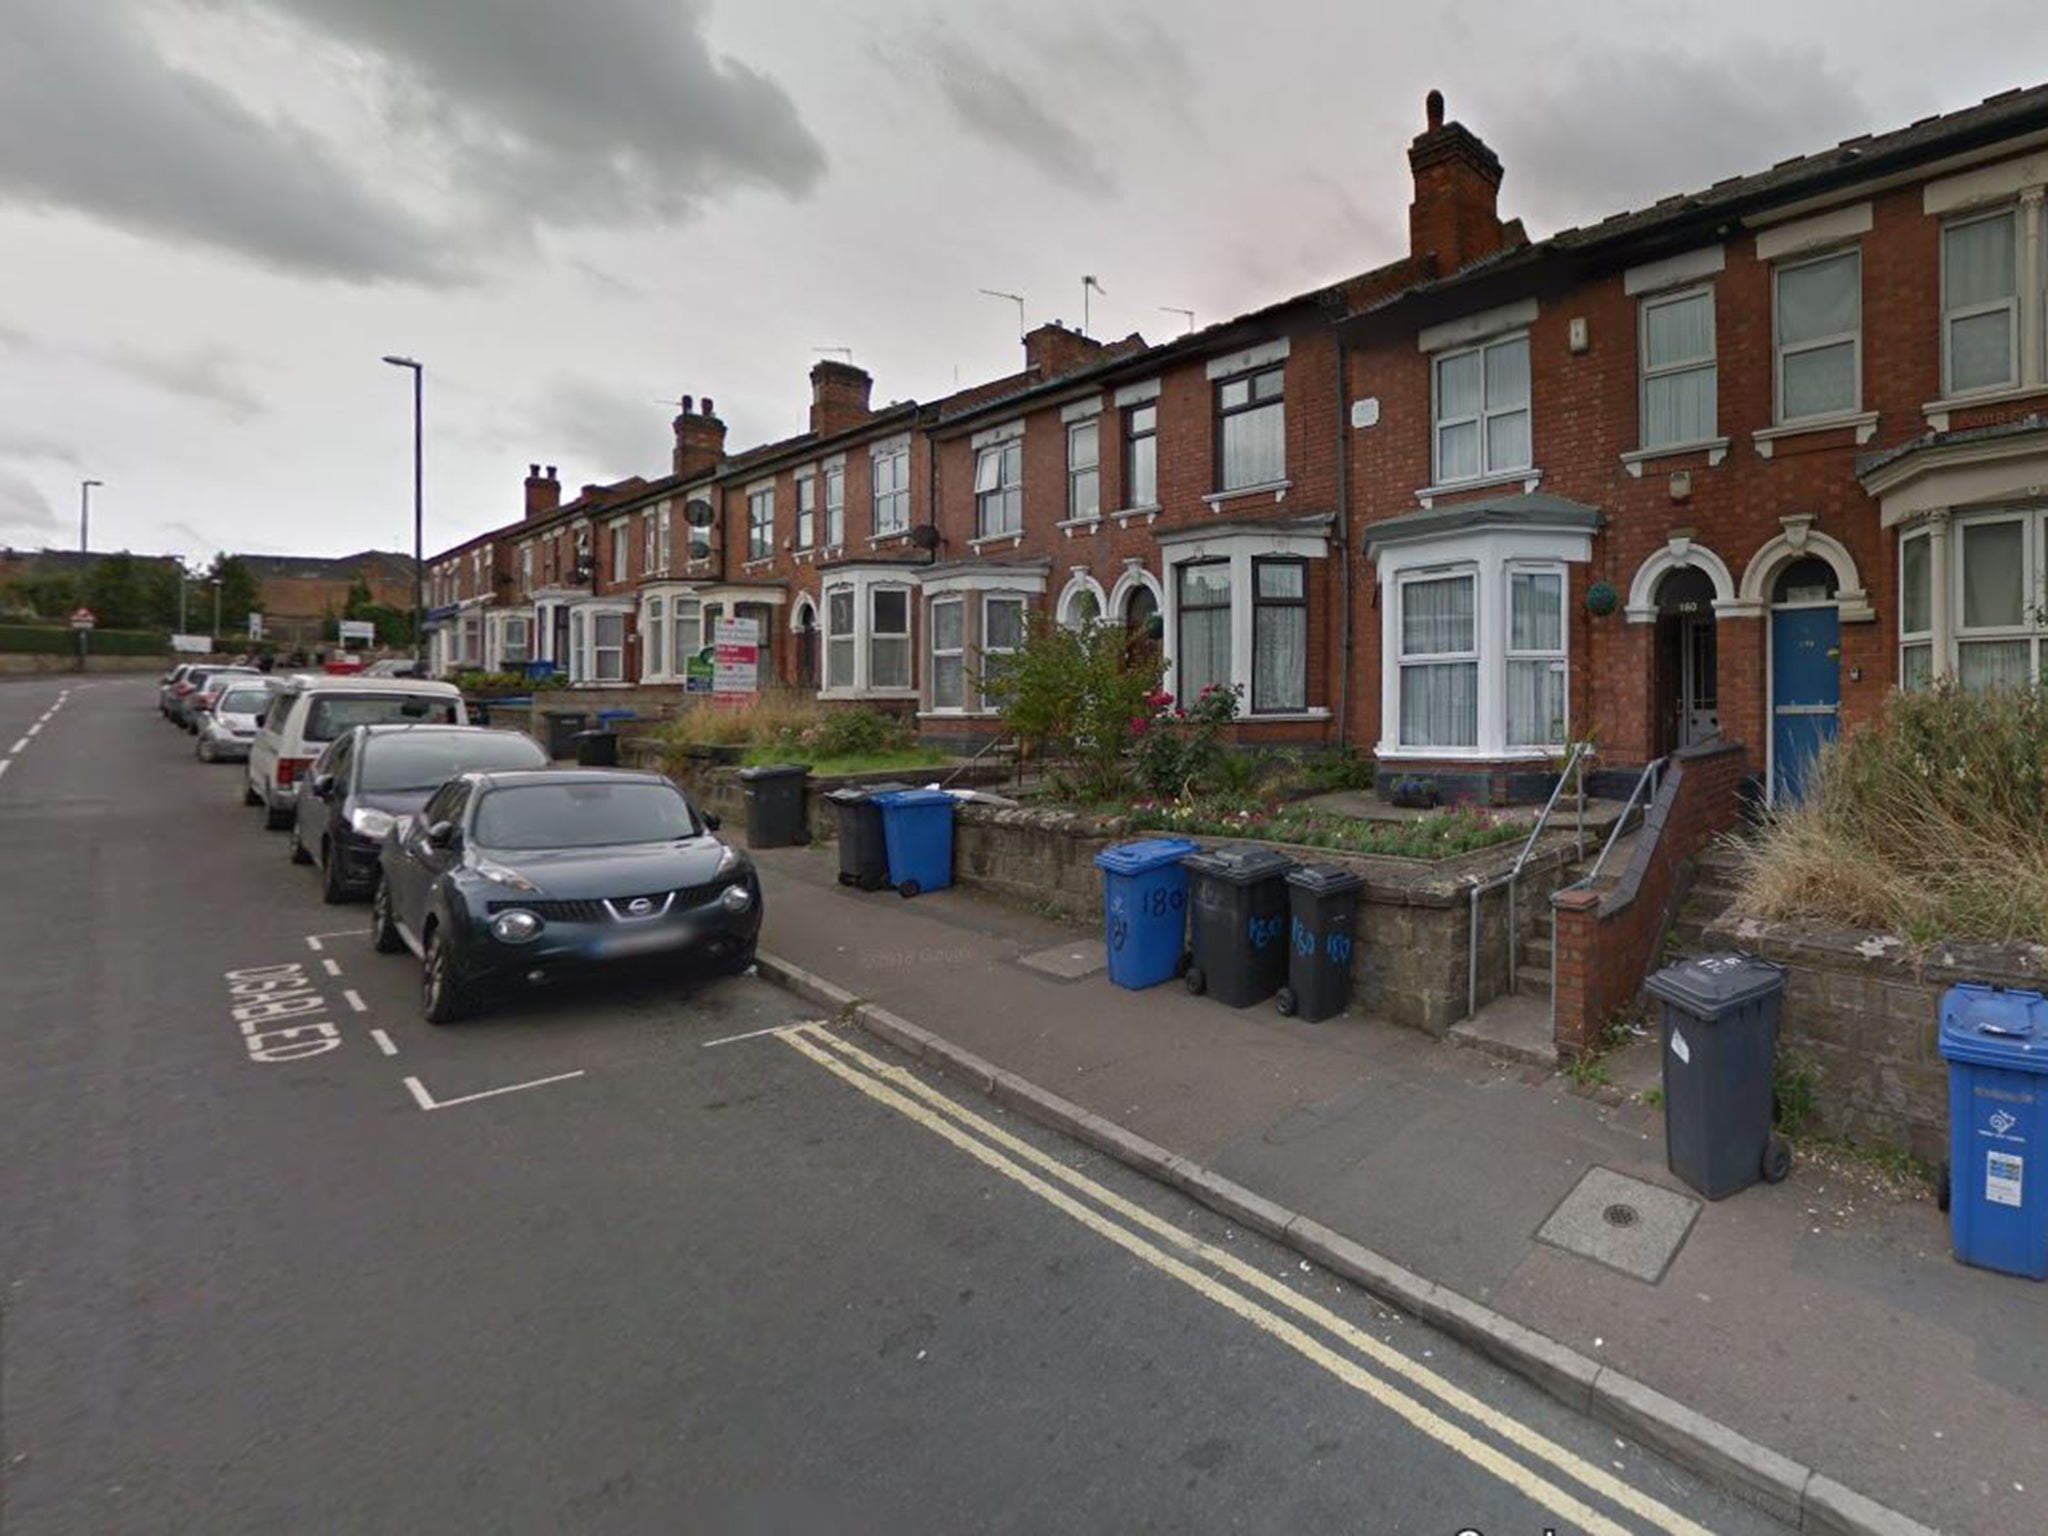 A 24-year-old man died after an assault on St Thomas Road in the Normanton area of Derby